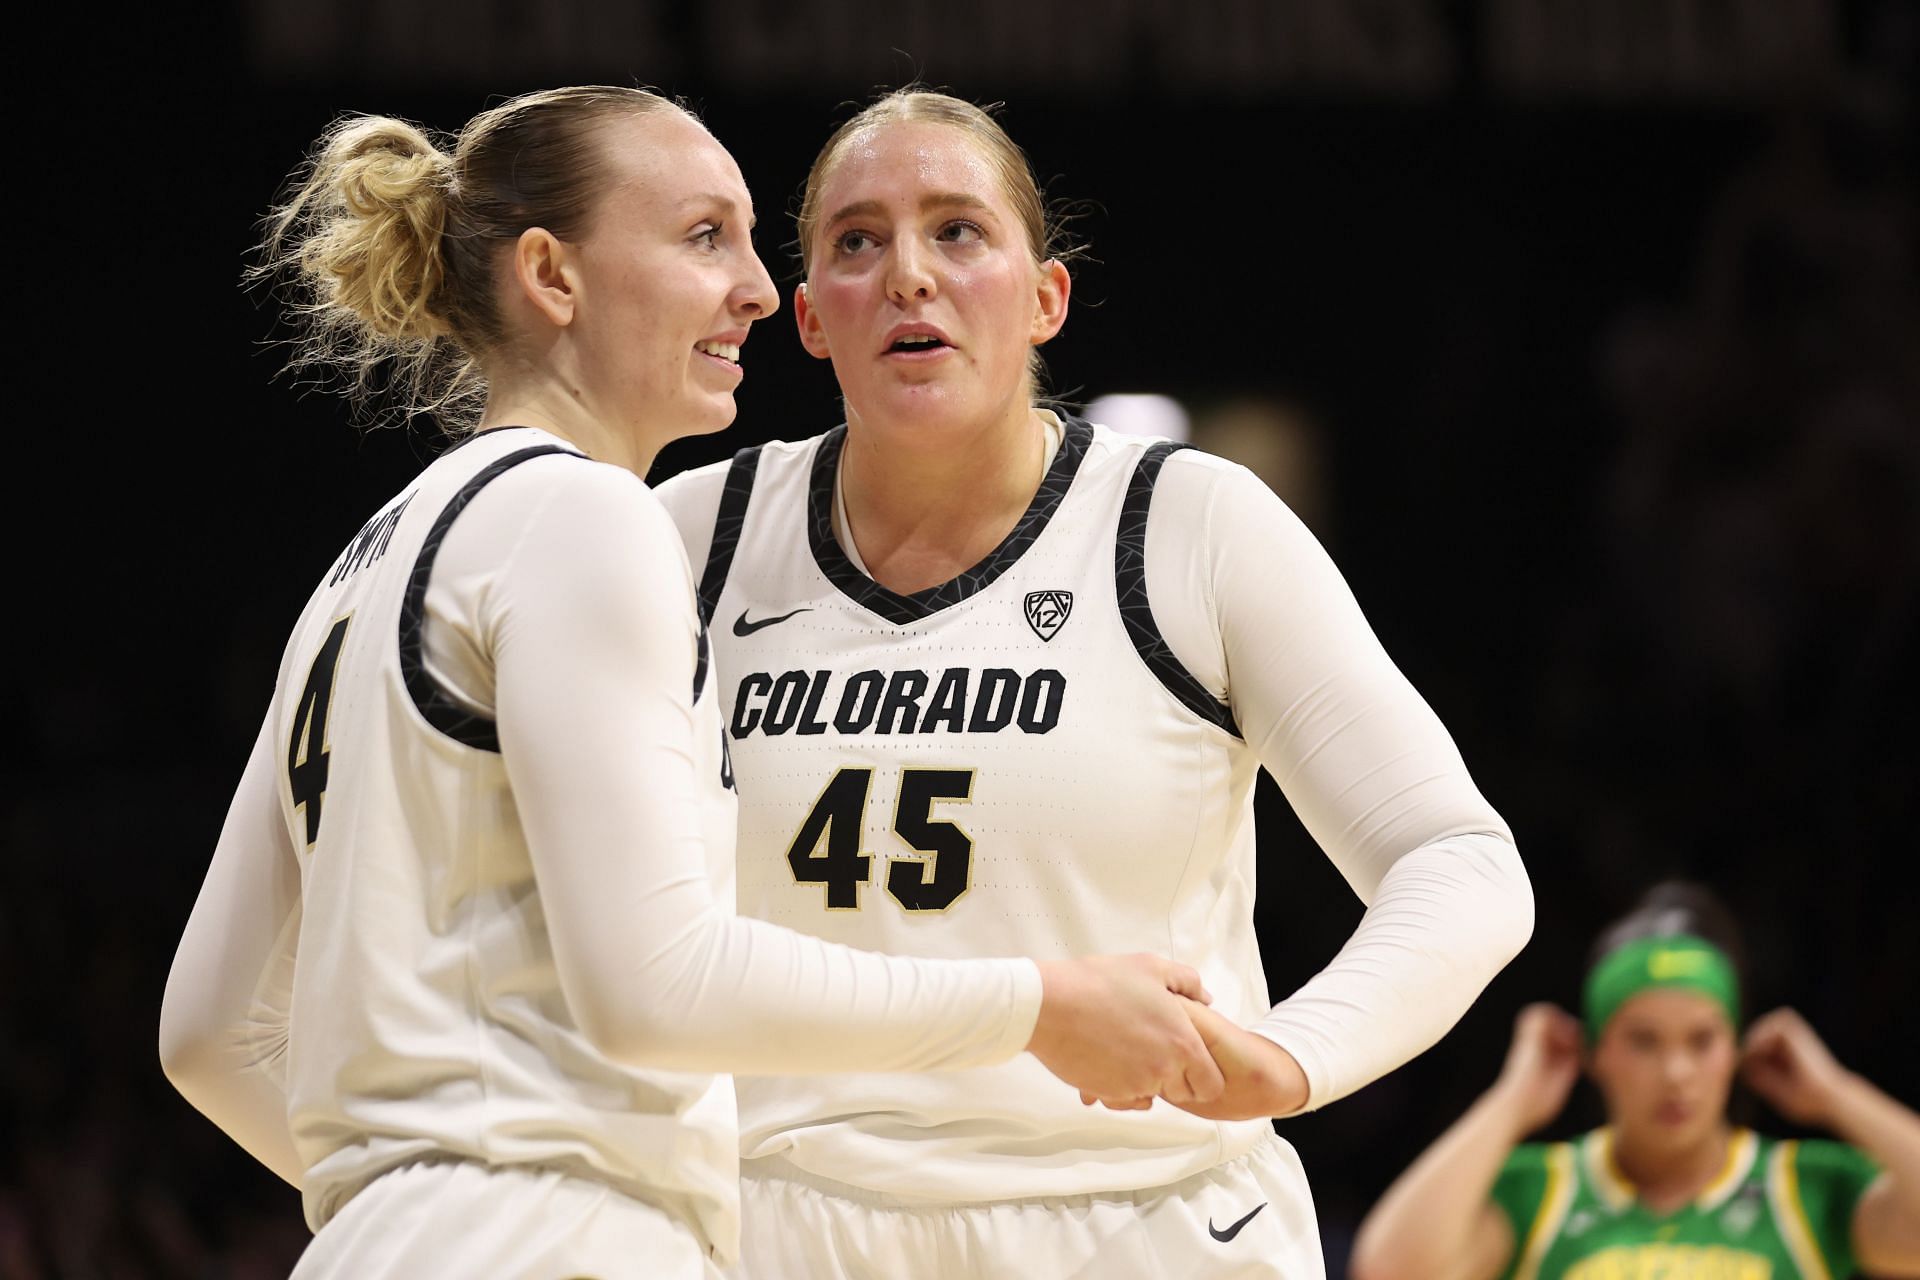 Charlotte Whittaker (right) played for 33 games with Colorado this season, averaging 3.1 points and 2.1 rebounds per game.